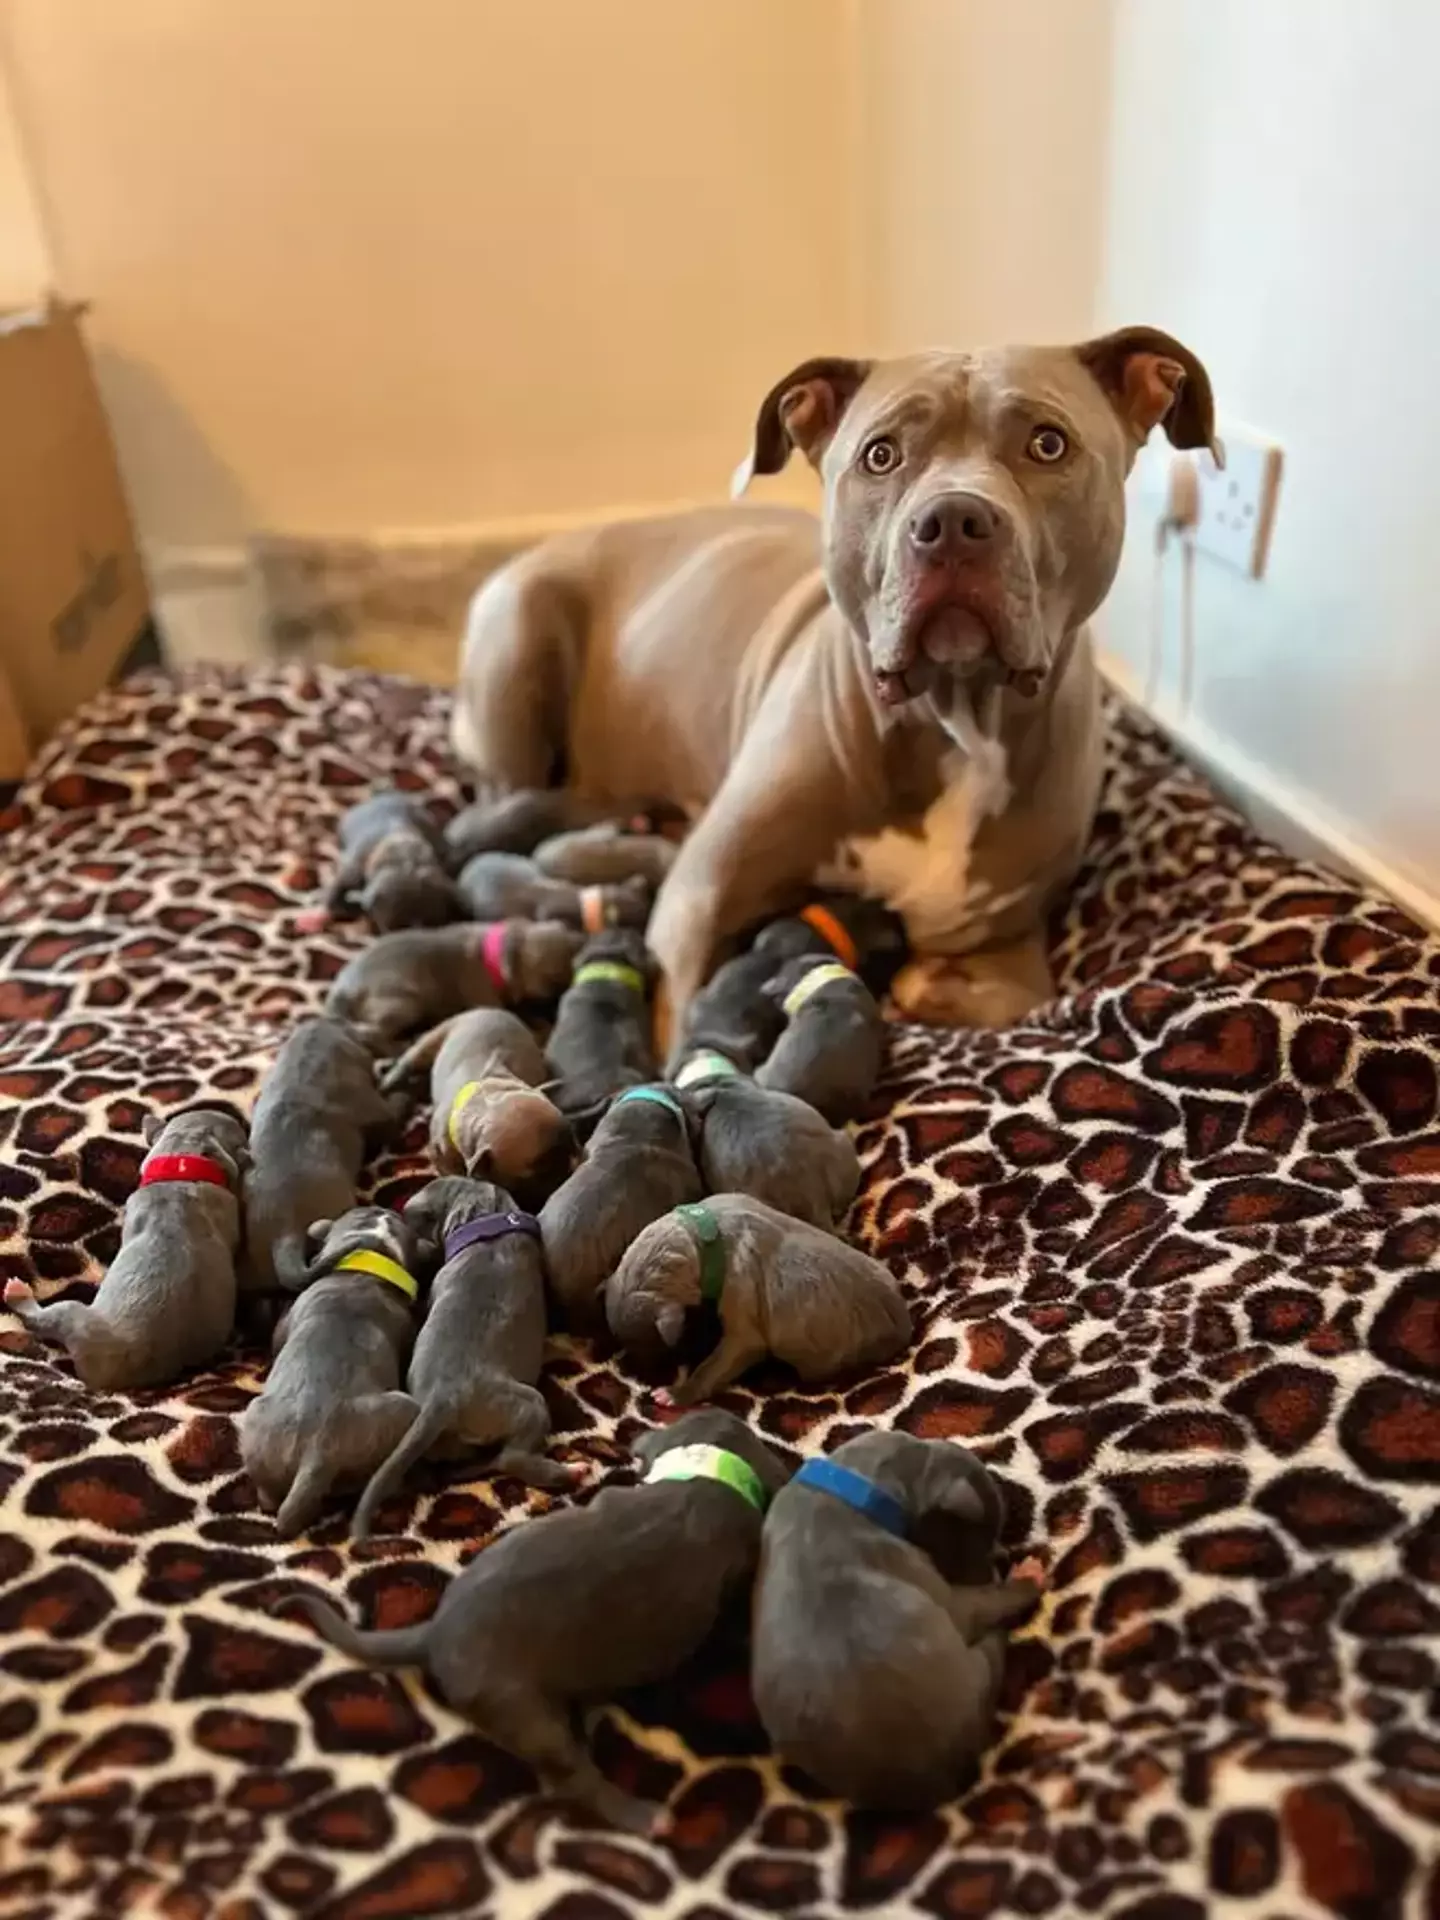 Jamie's dog recently gave birth to 18 puppies.